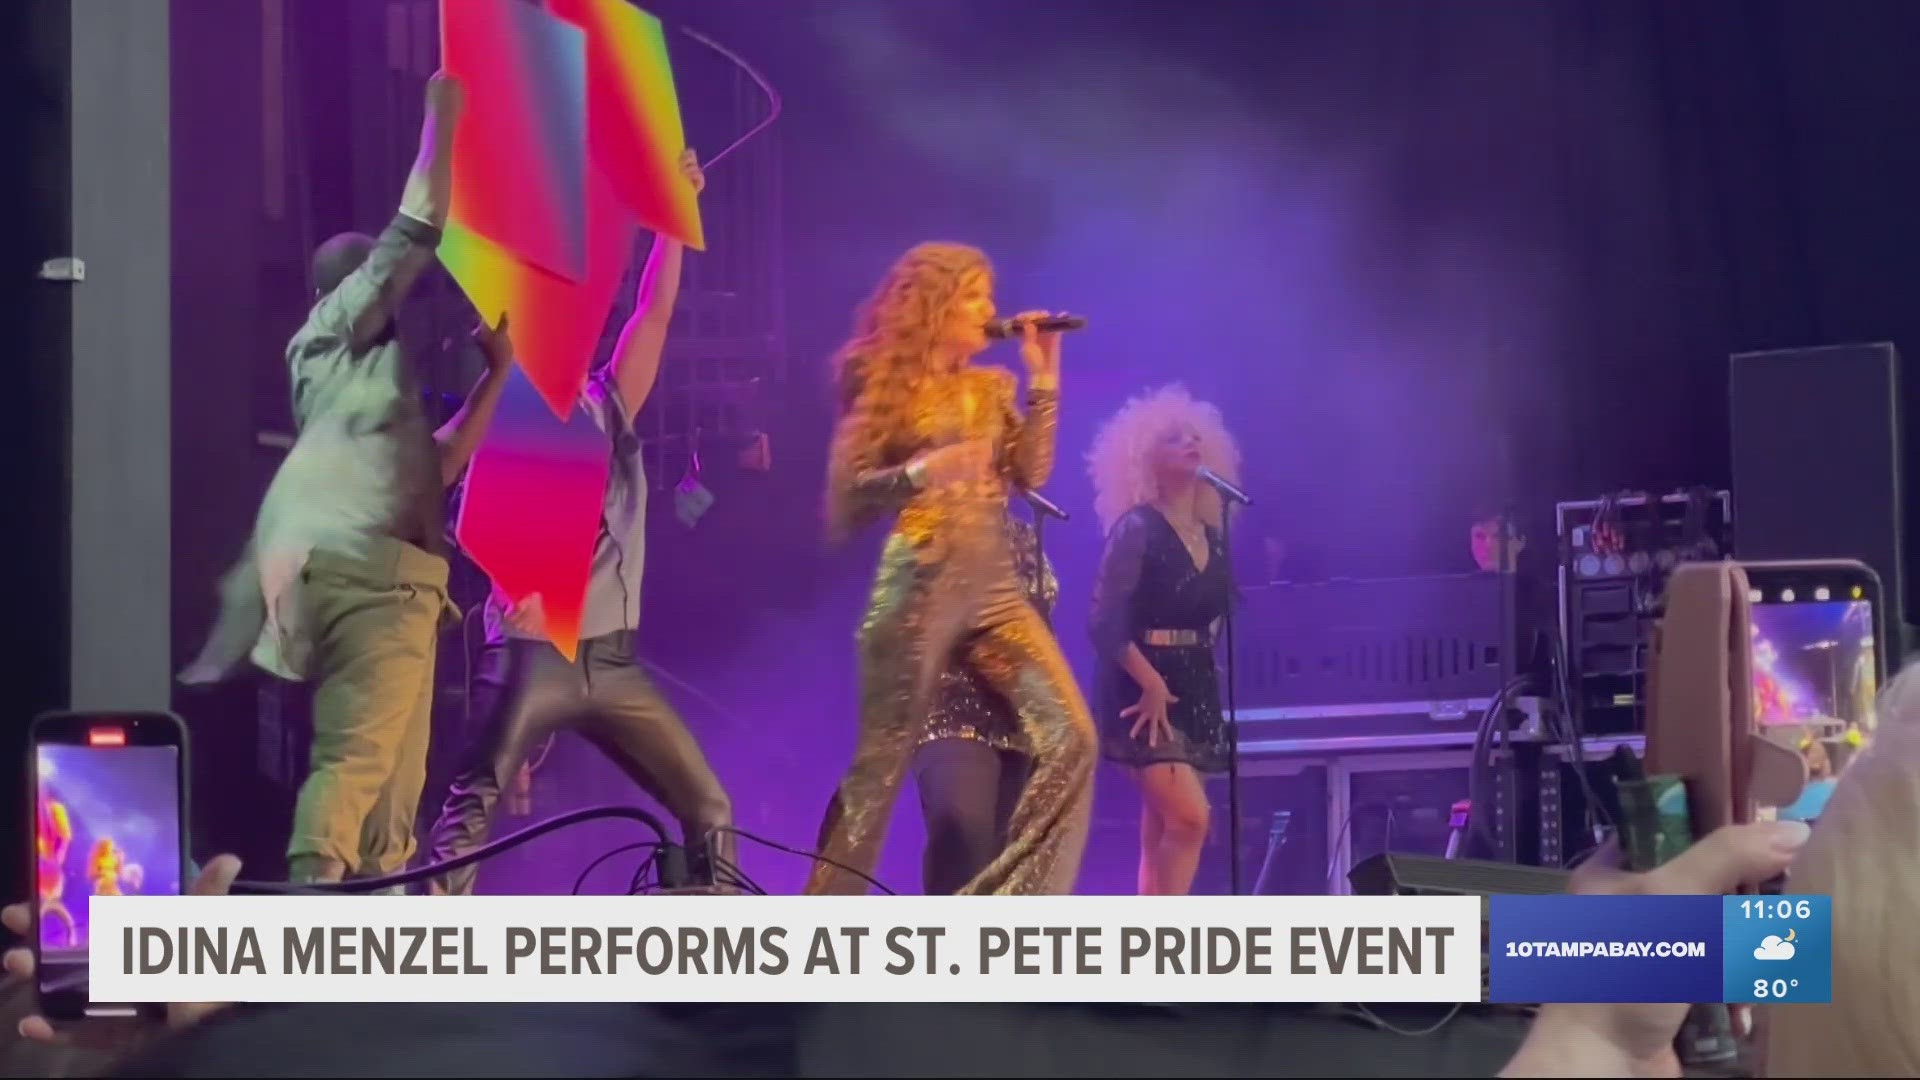 Kickoff to St. Pete Pride events coincide on June 1 with the official start of Pride Month in celebration of the LGBTQ+ community.